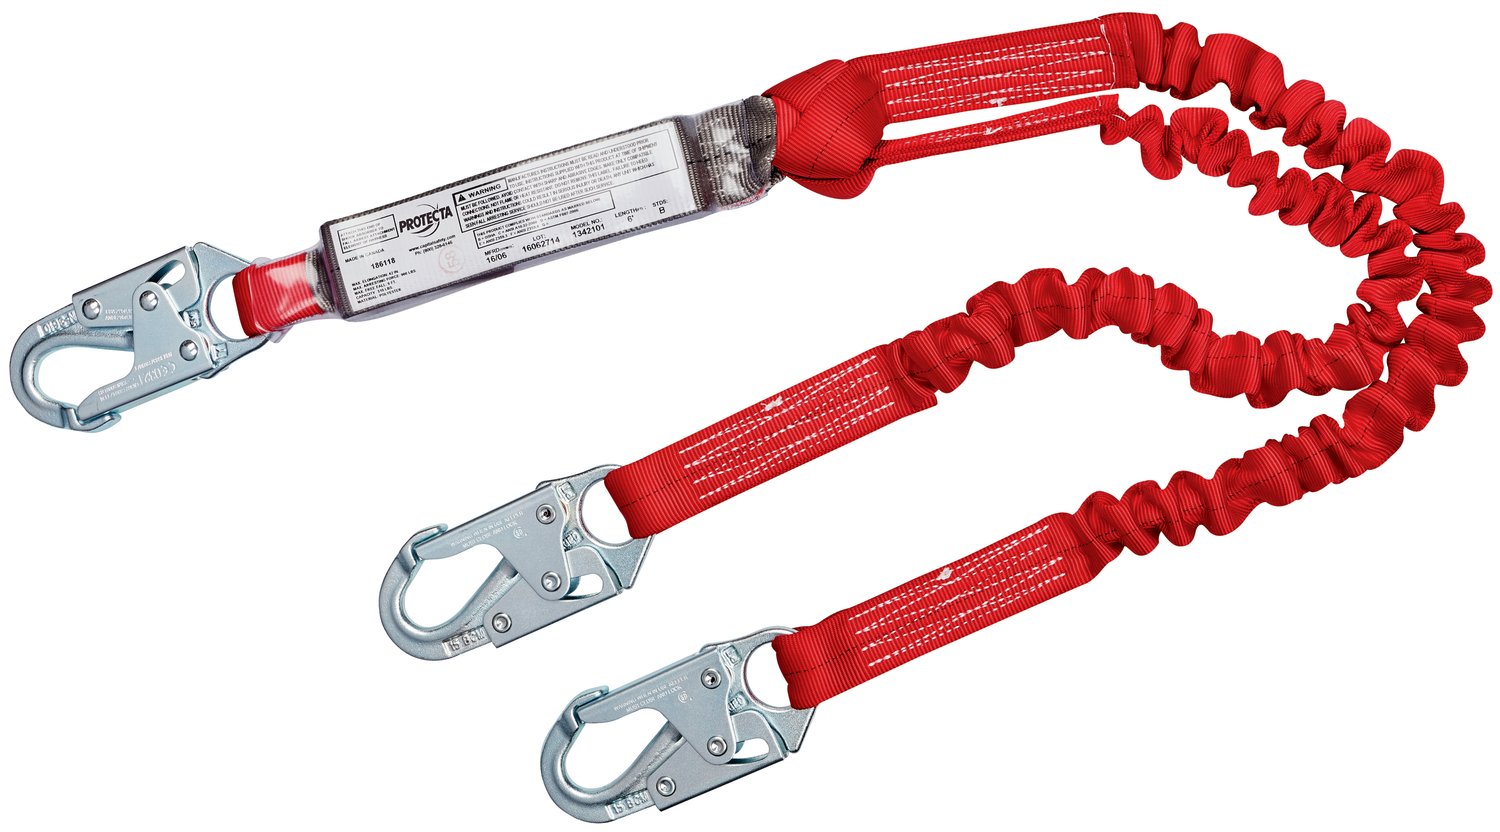 7012817402 - 3M Protecta 100% Tie-Off Stretch Web Shock-Absorbing Lanyard 1342101, 6 ft